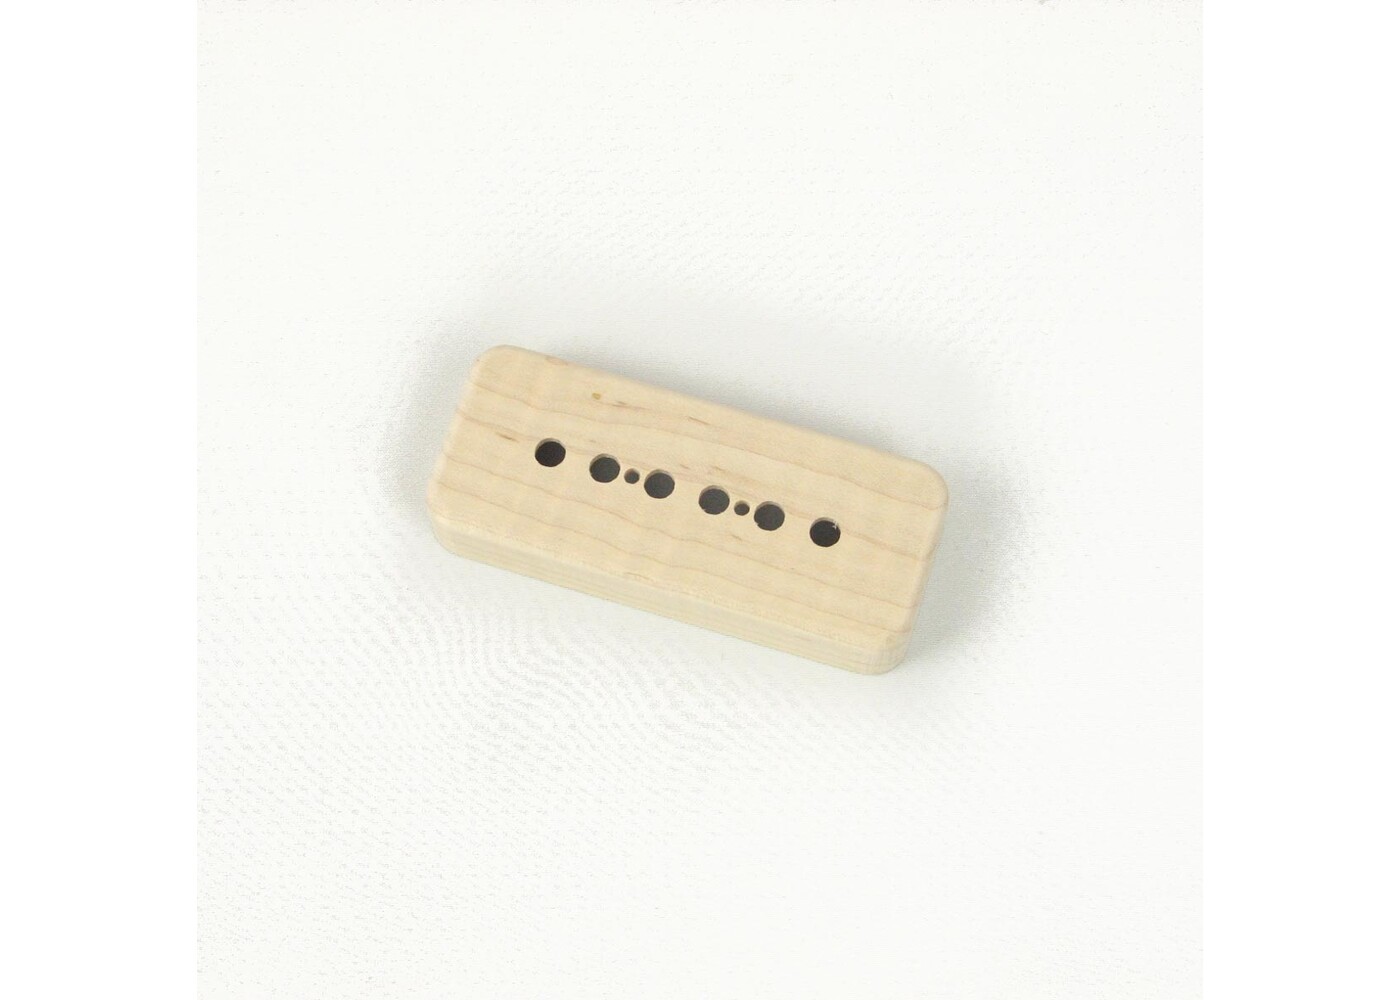 Guilford Guilford Flame Maple P-90 Cover Seymour Duncan spacing